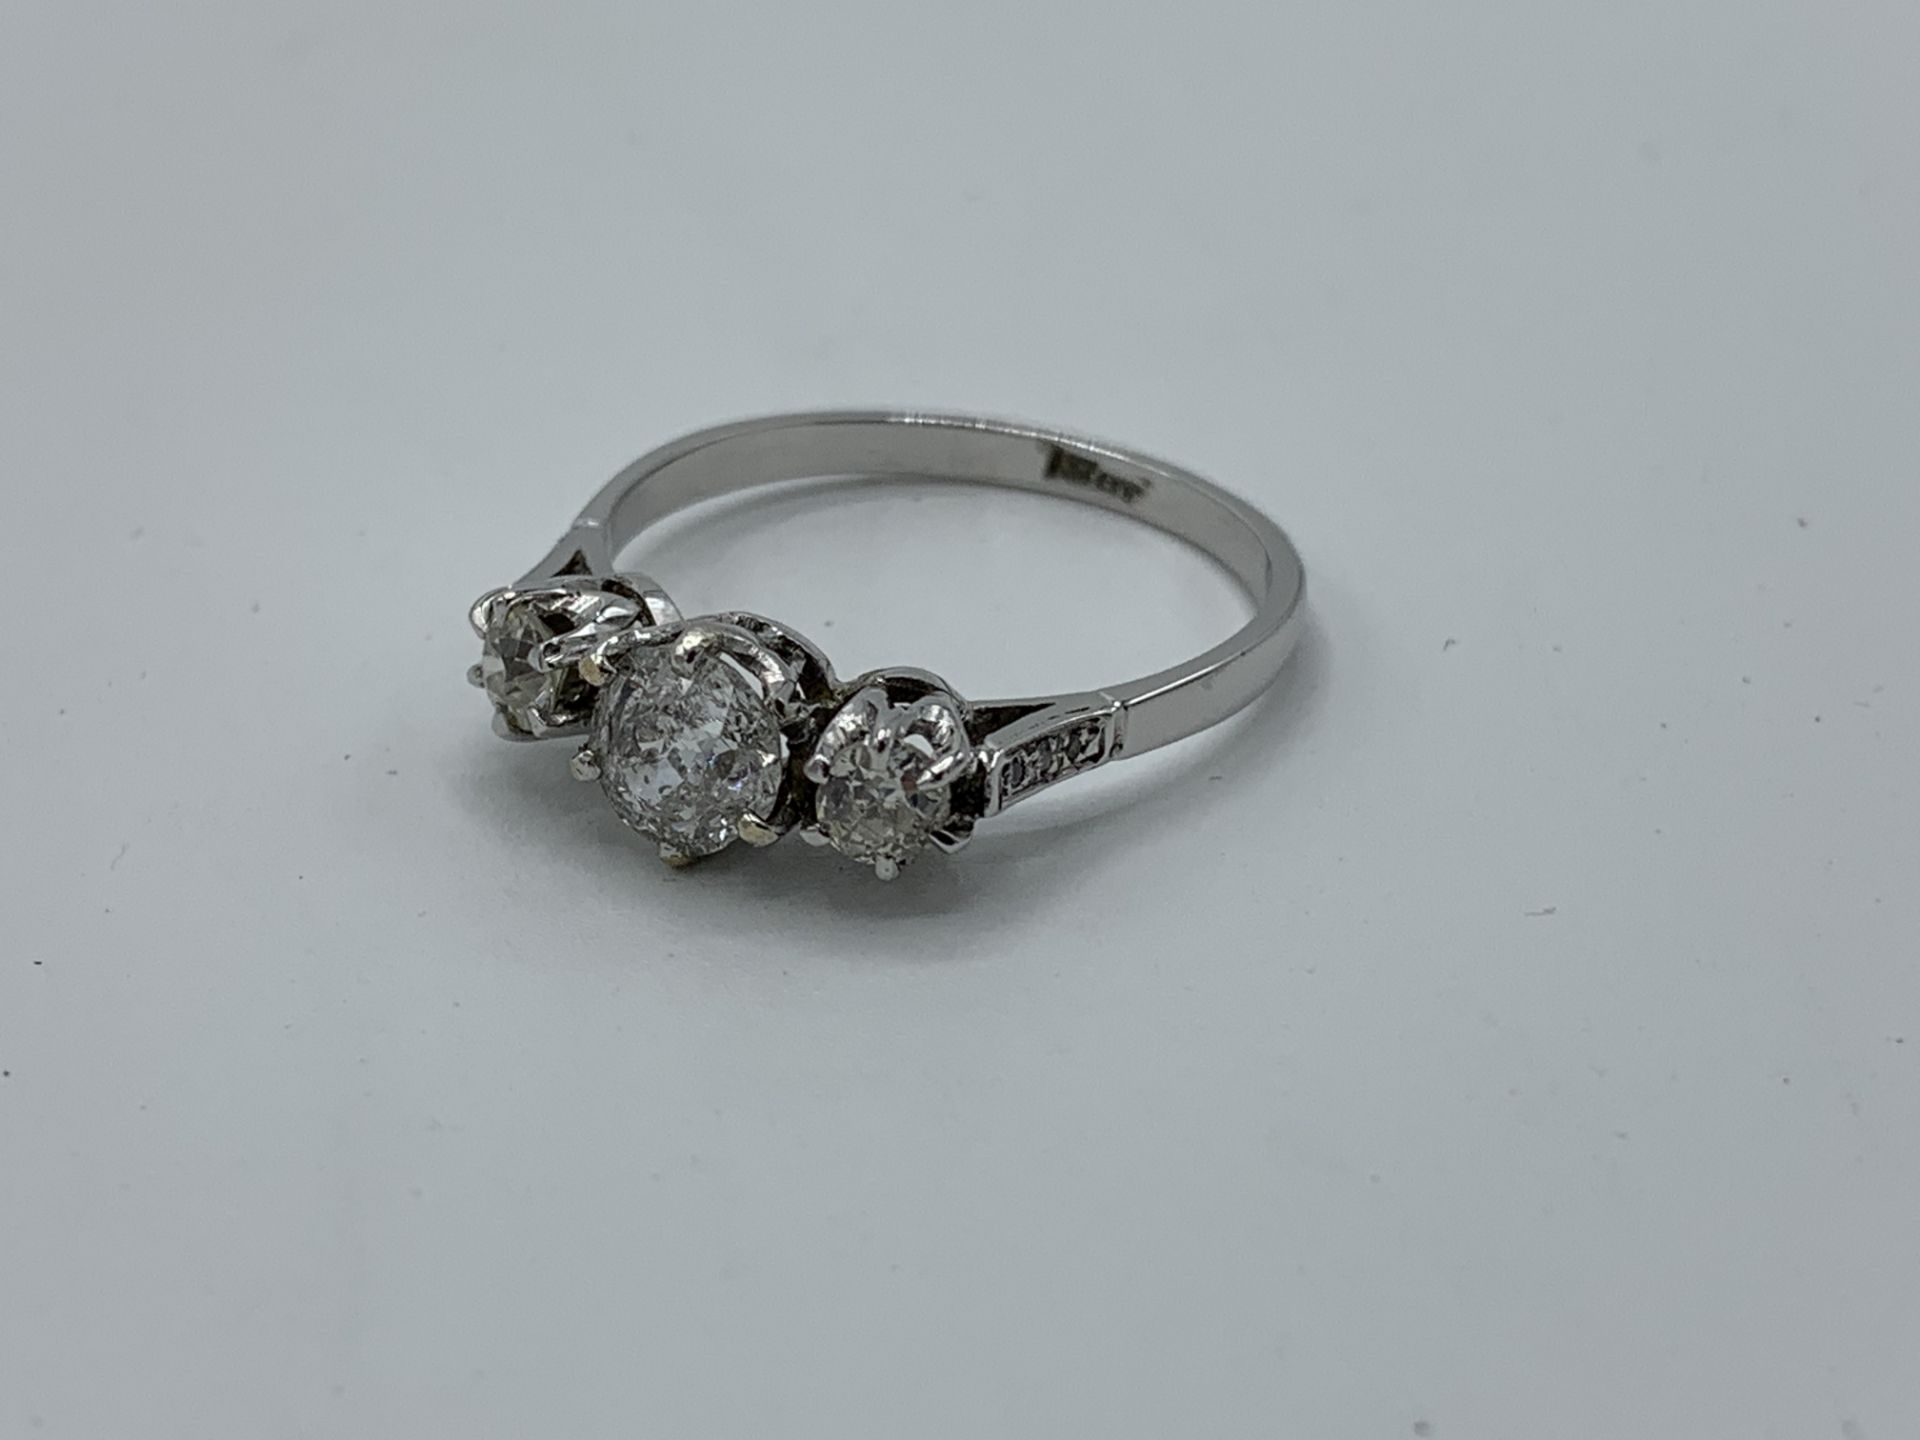 18ct white gold 3 stone old cut diamond ring, weight 2.7gms, size Q 1/2. Estimate £700-750. - Image 3 of 4